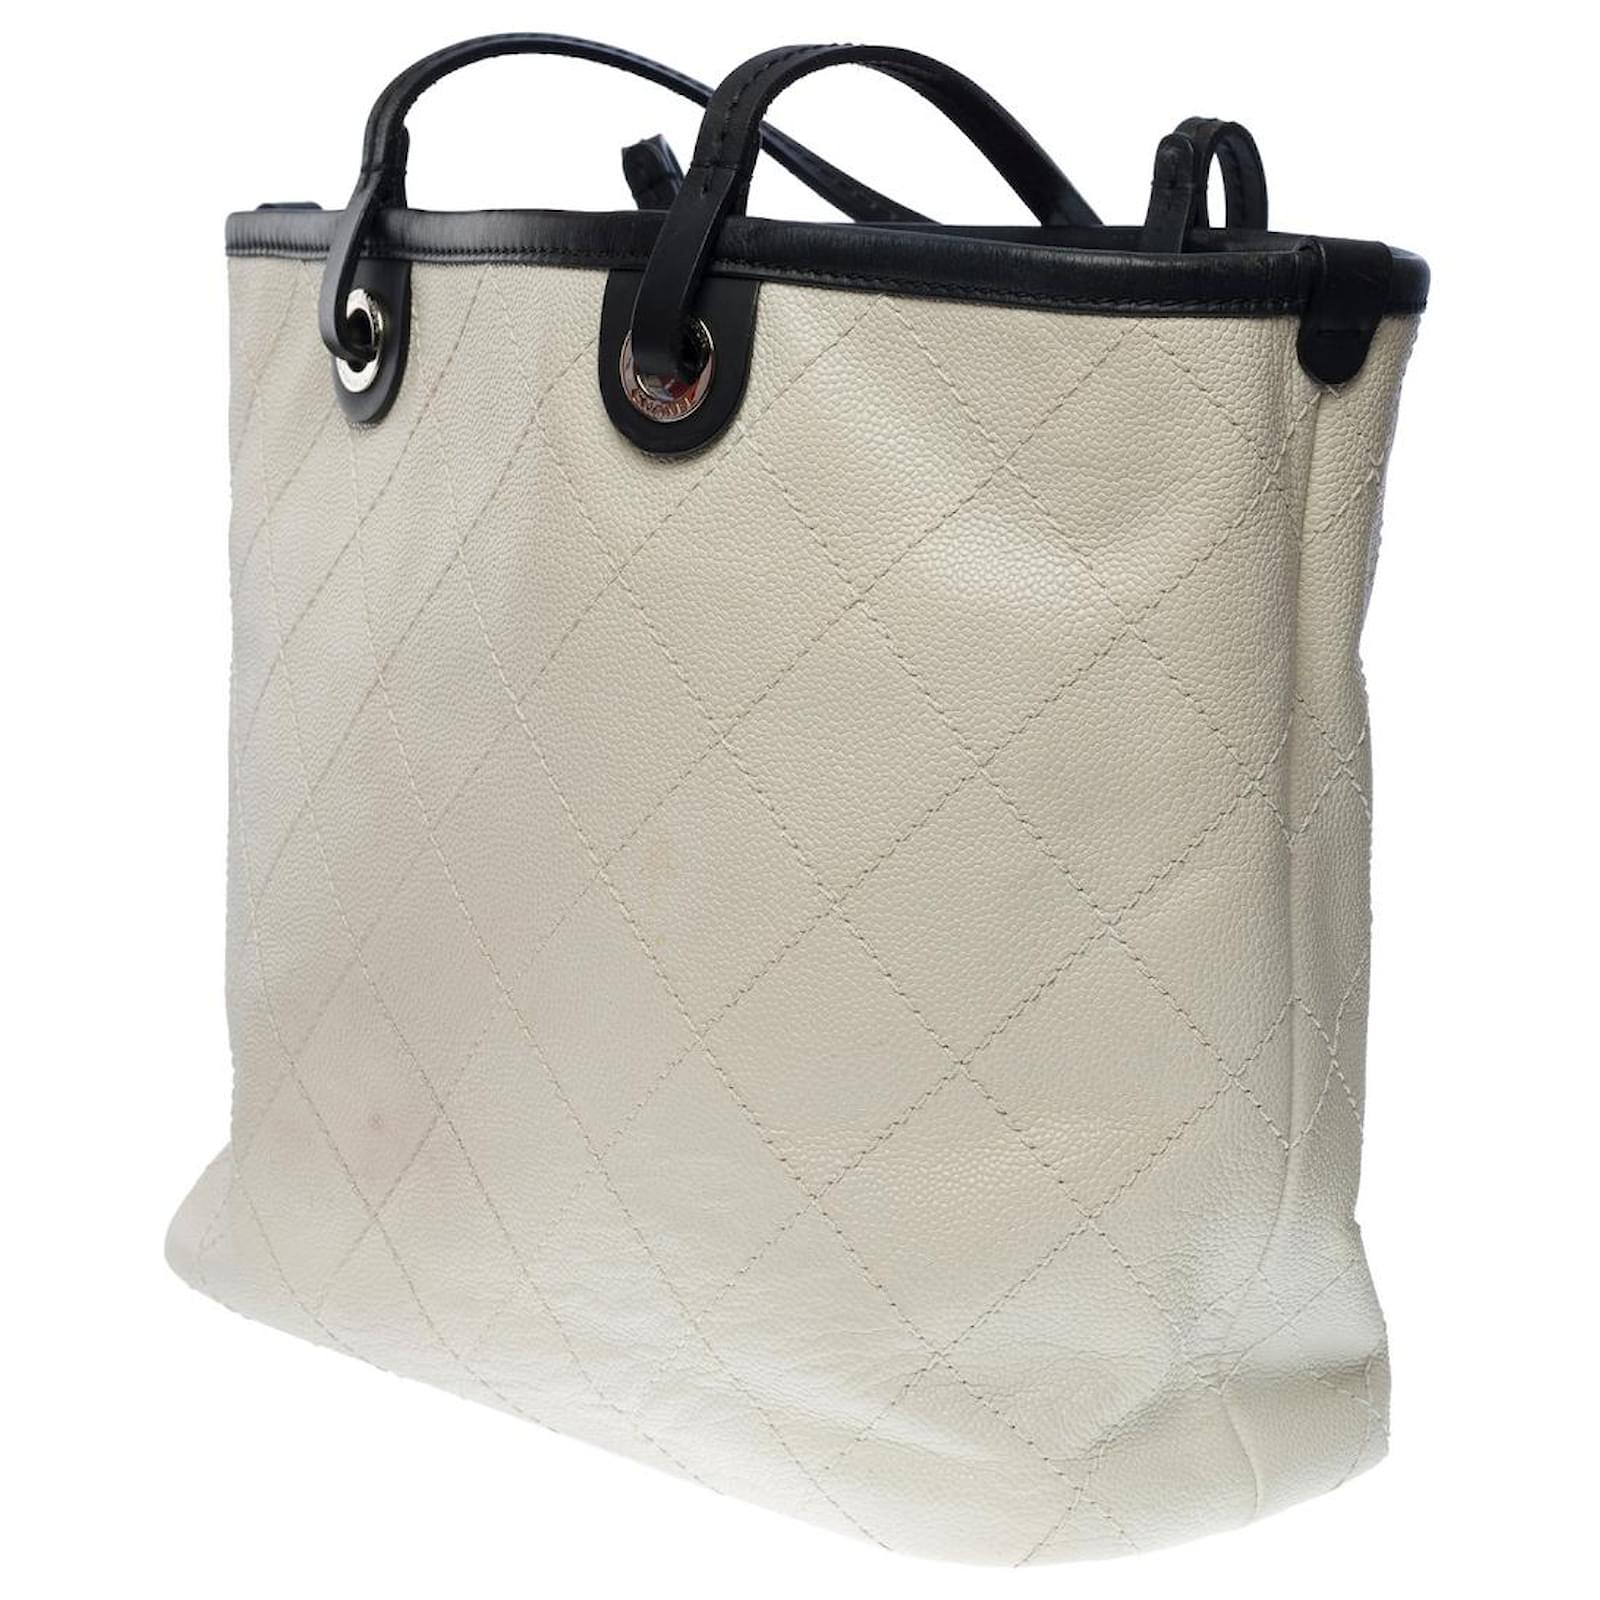 Chanel Grey Quilted Caviar Shopping Tote Silver Hardware, 2014 (Very Good), Womens Handbag